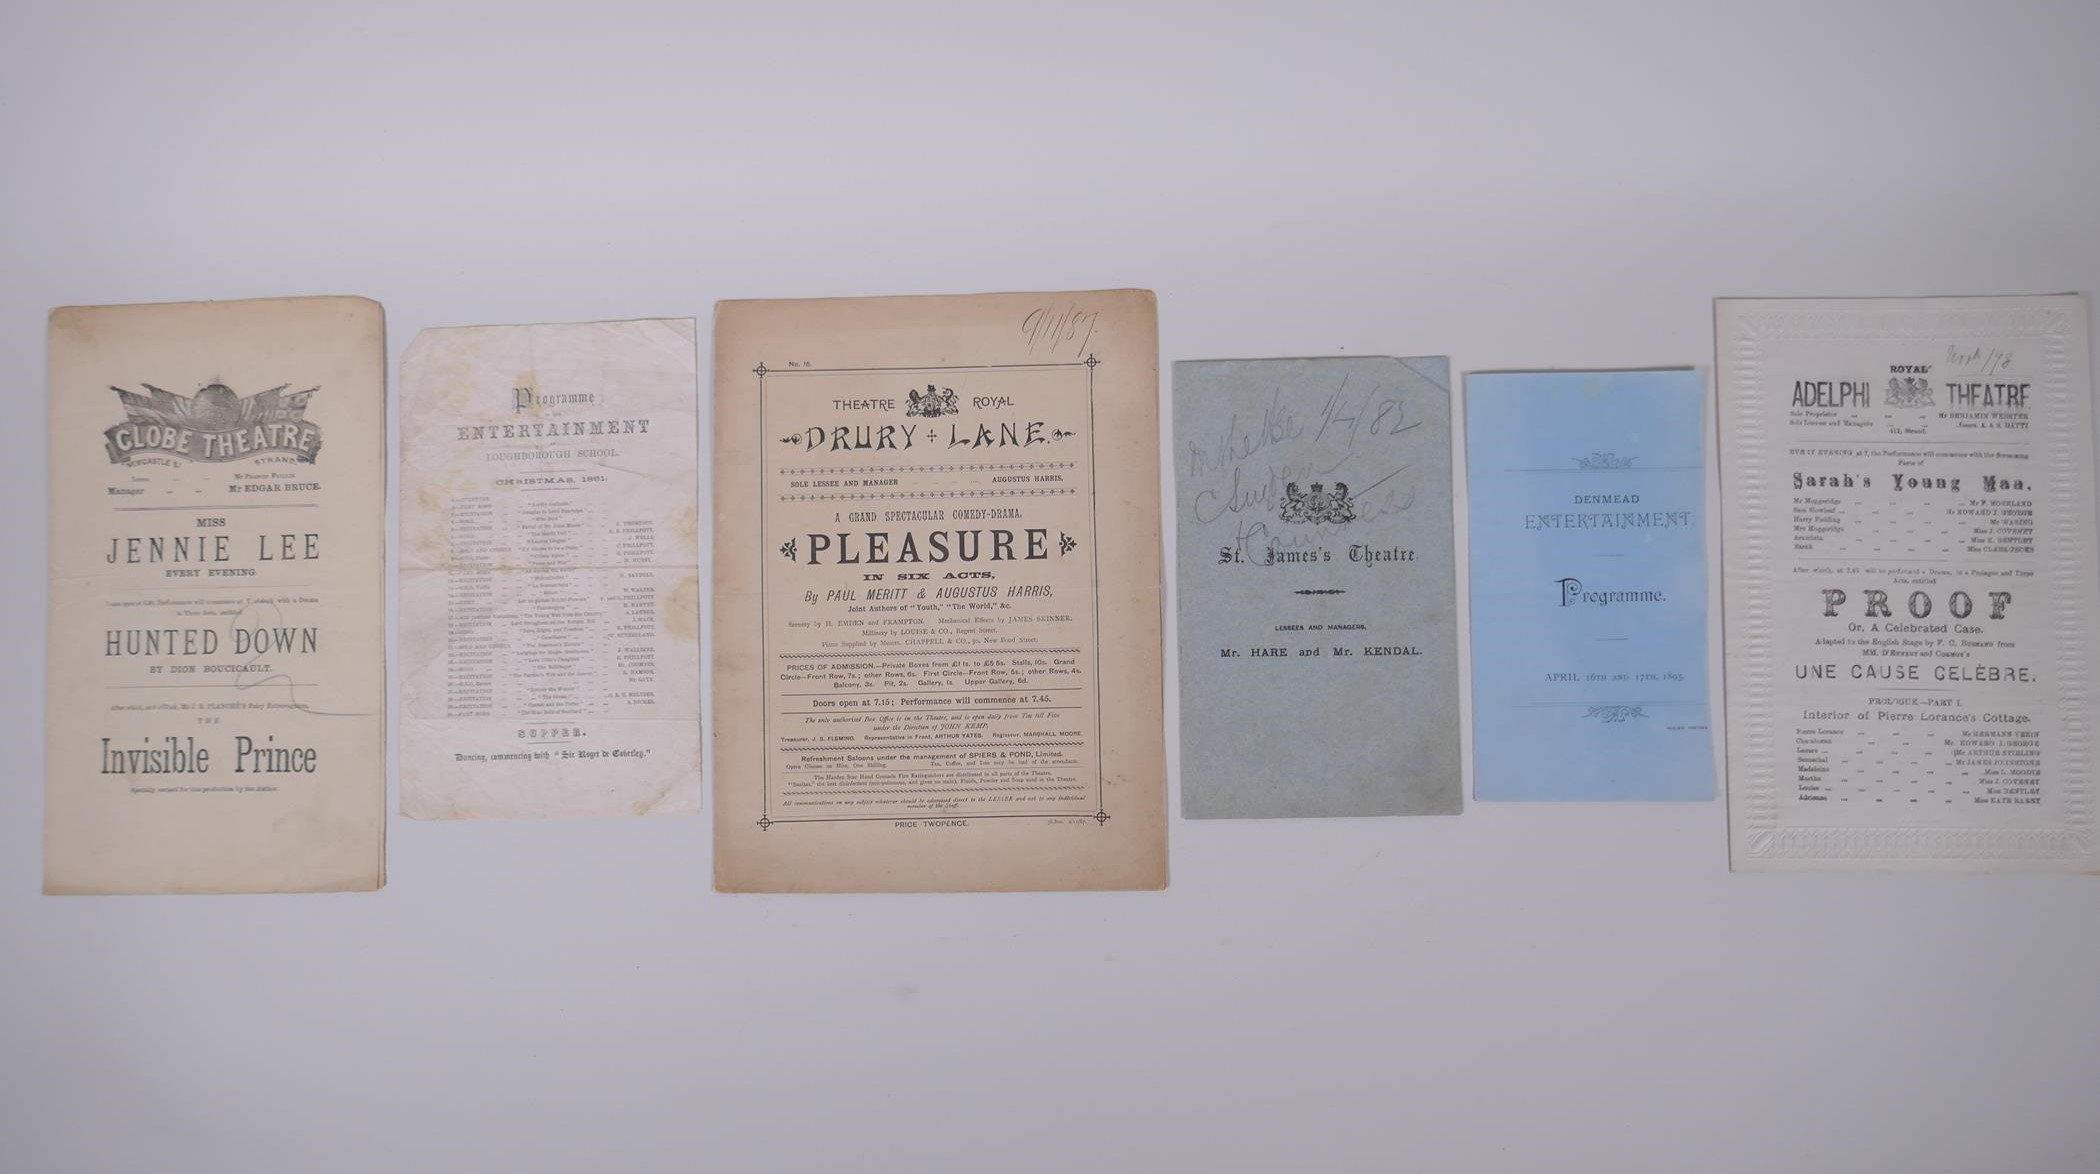 A collection of C19th London theatre programs including The Globe, St James's Theatre, Theatre Royal